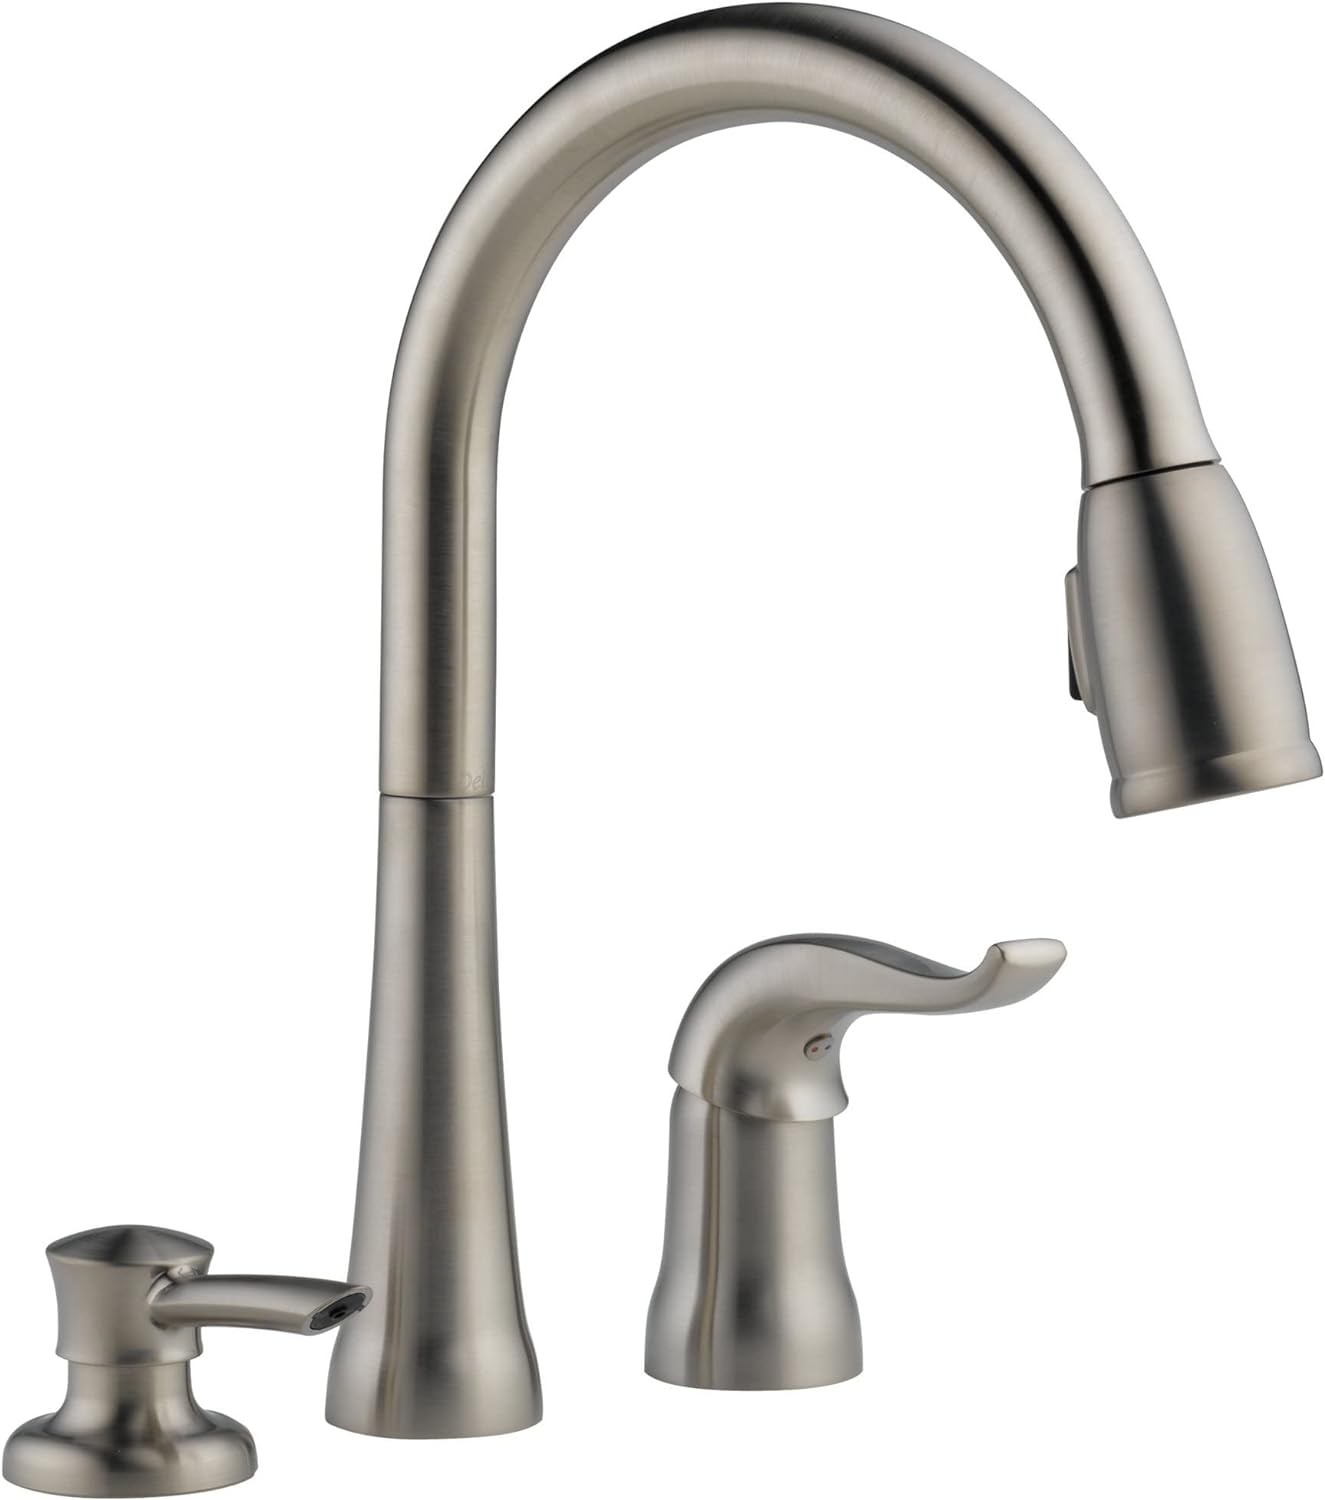 This faucet has made me enjoy using my sink again! I went from an old standard solid angle neck kitchen faucet to this, and it has made a world of difference. The removable head is easy to remove and easy to snap back in place, with plenty of hose to get water where you need it. The faucet handle feels very nice, and I have not seen any signs of wear on it yet, though I haven't had it for too long. The switch on the head feels a little cheap, but is a solid spray/stream. It keeps it' setting, s